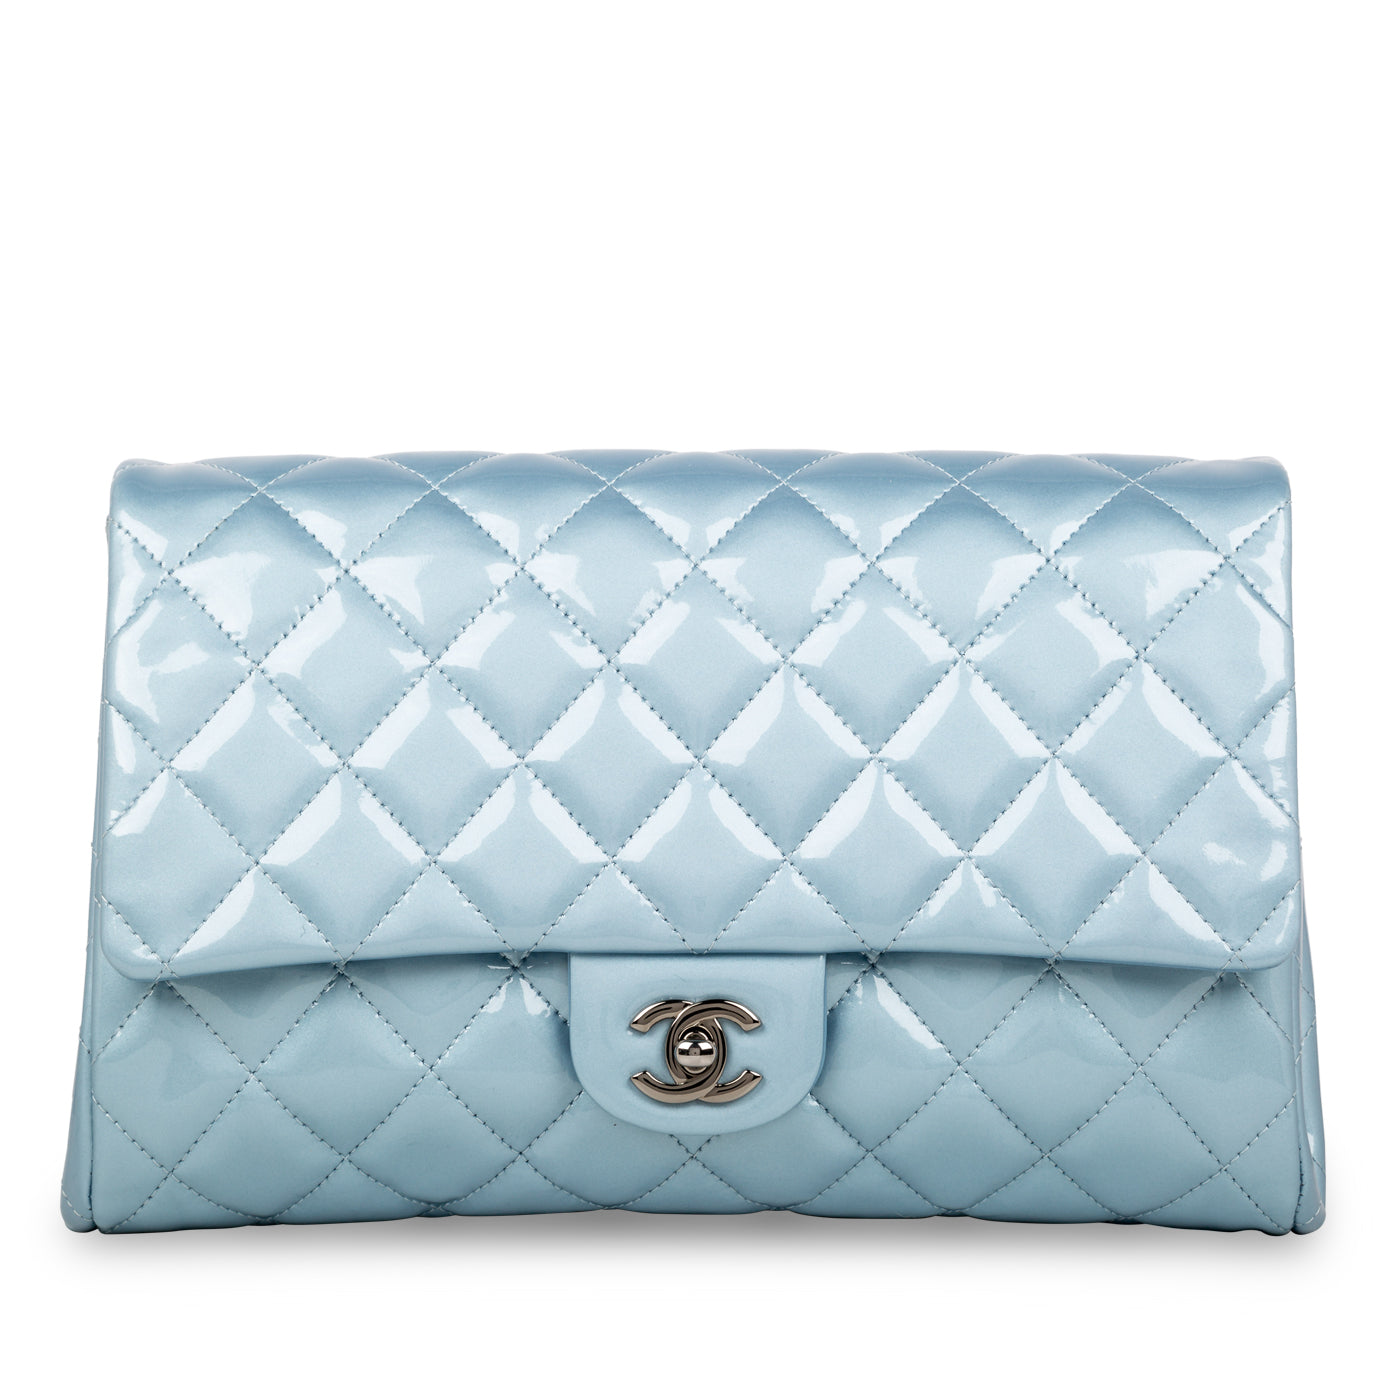 Authentic Second Hand Chanel Classic Clutch with Chain PSS14500269   THE FIFTH COLLECTION